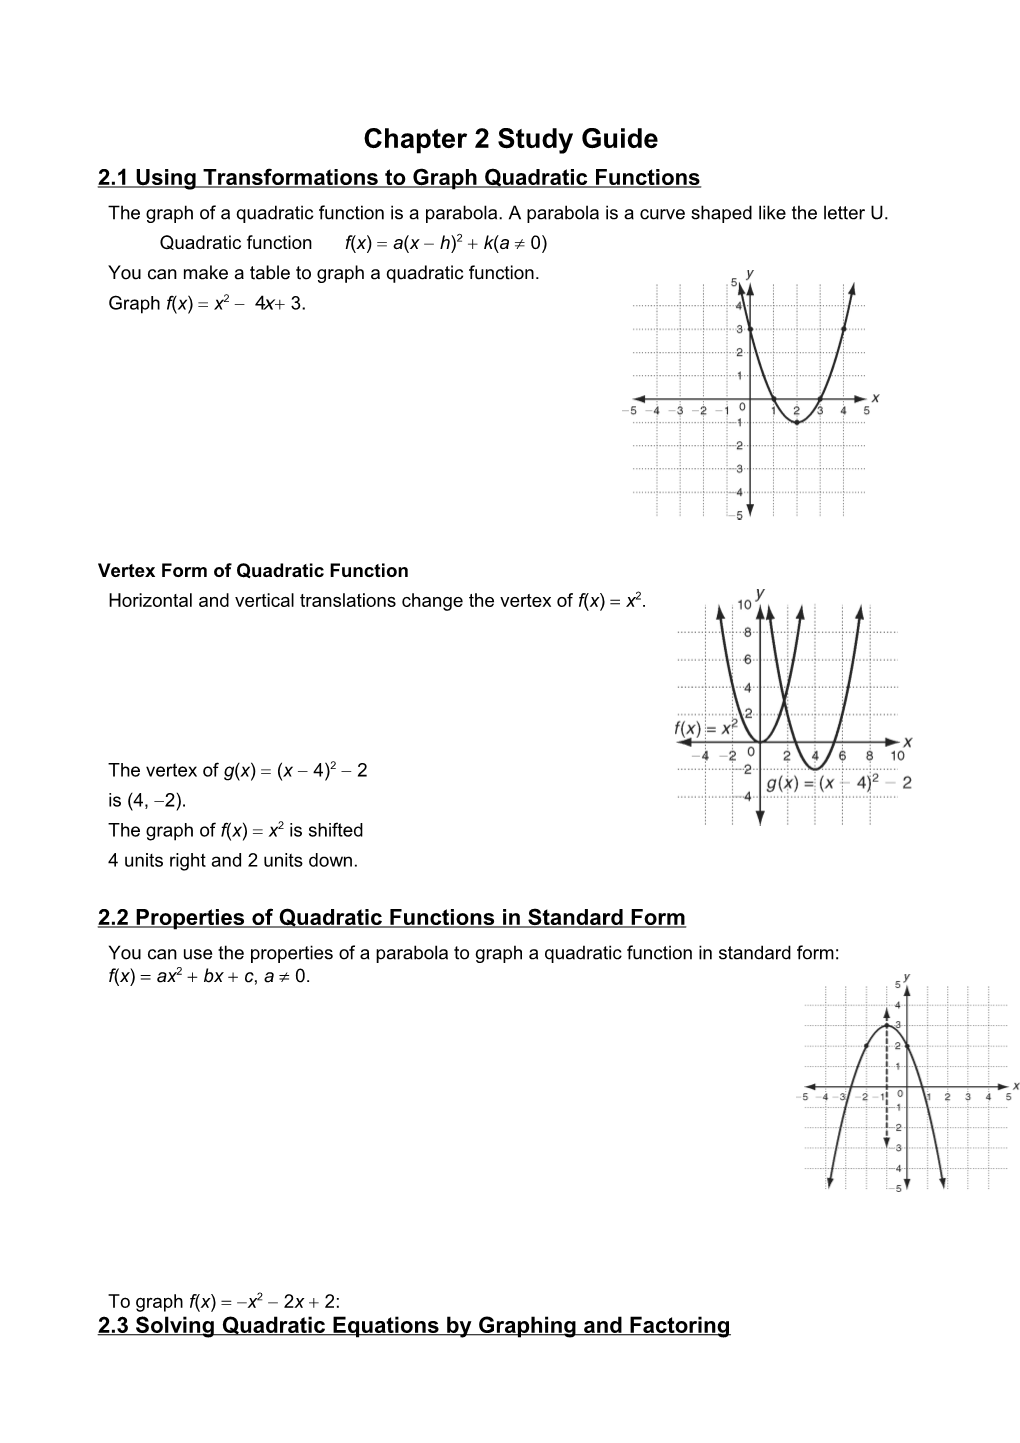 2.1 Using Transformations to Graph Quadratic Functions